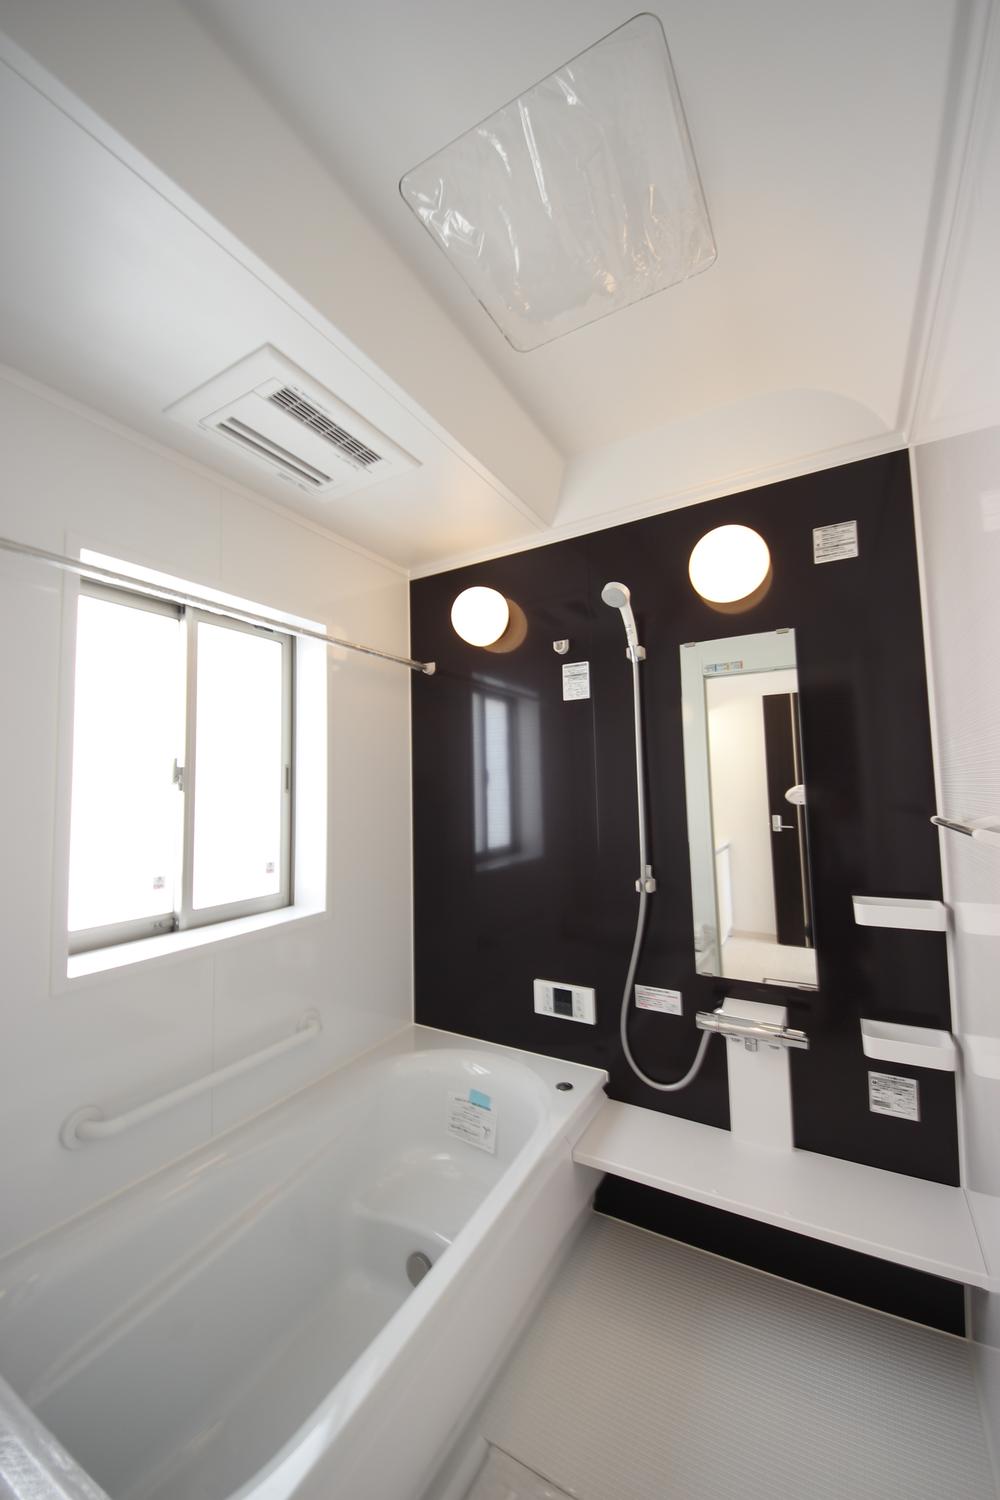 Same specifications photo (bathroom). Stylish unit bus which was on one side of the wall only "black". Also it comes with a bathroom drying.